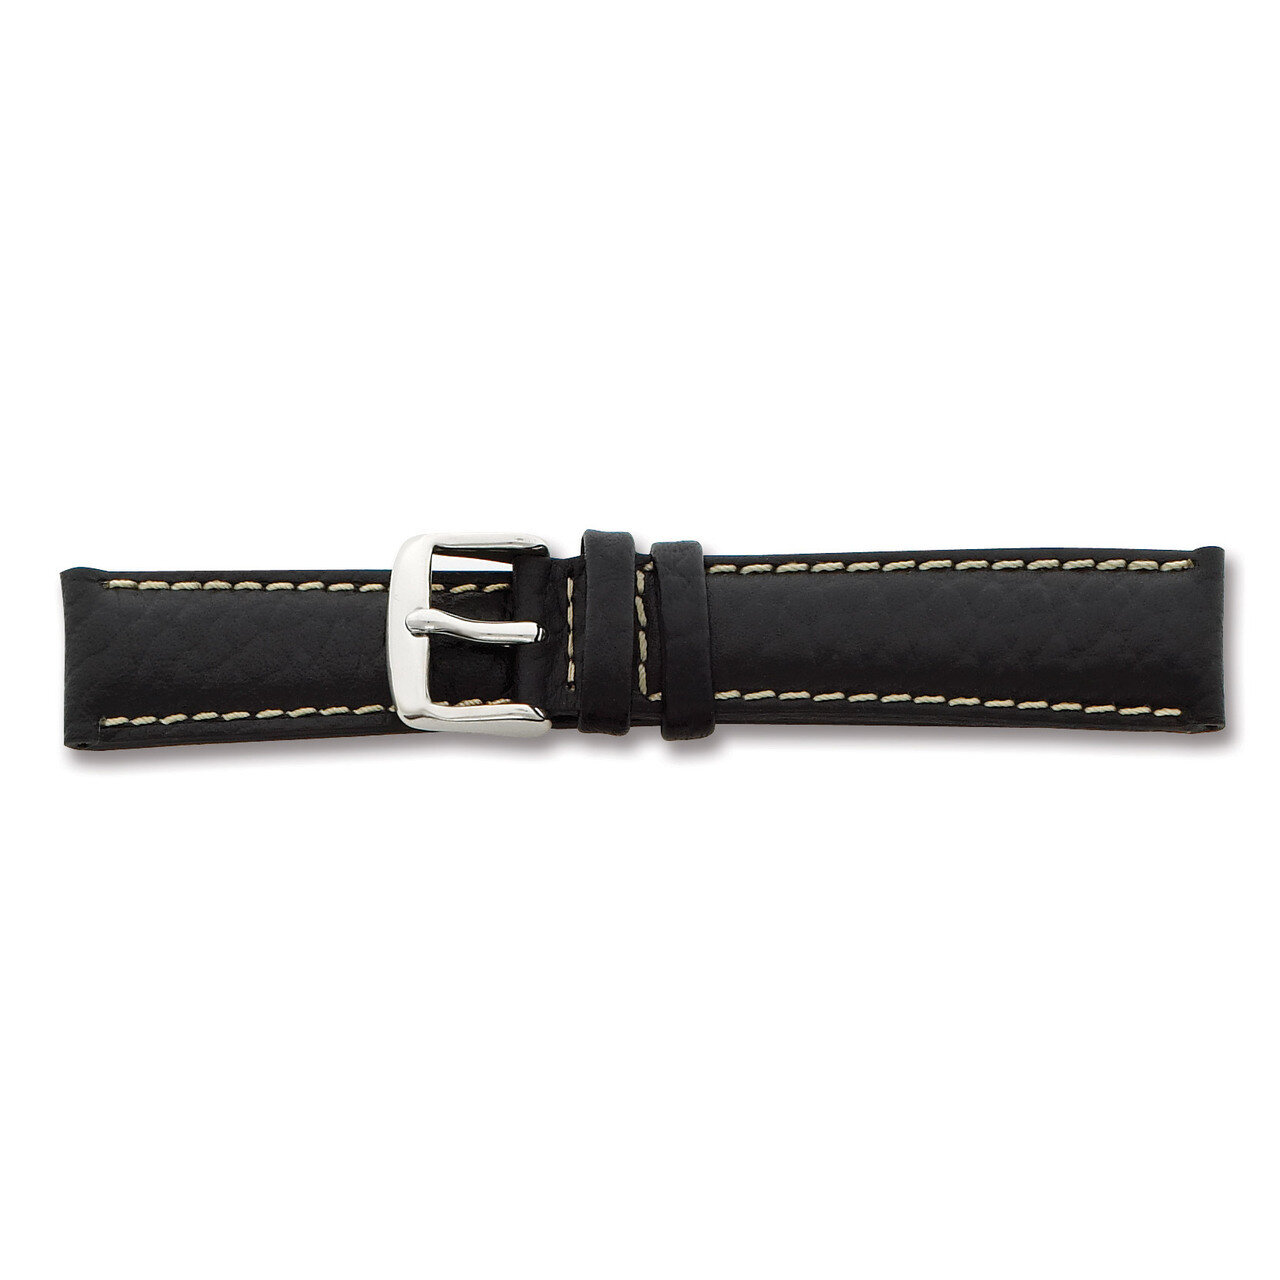 18mm Long Black Leather White Stitch Watch Band 8.5 Inch Silver-tone Buckle BA99L-18